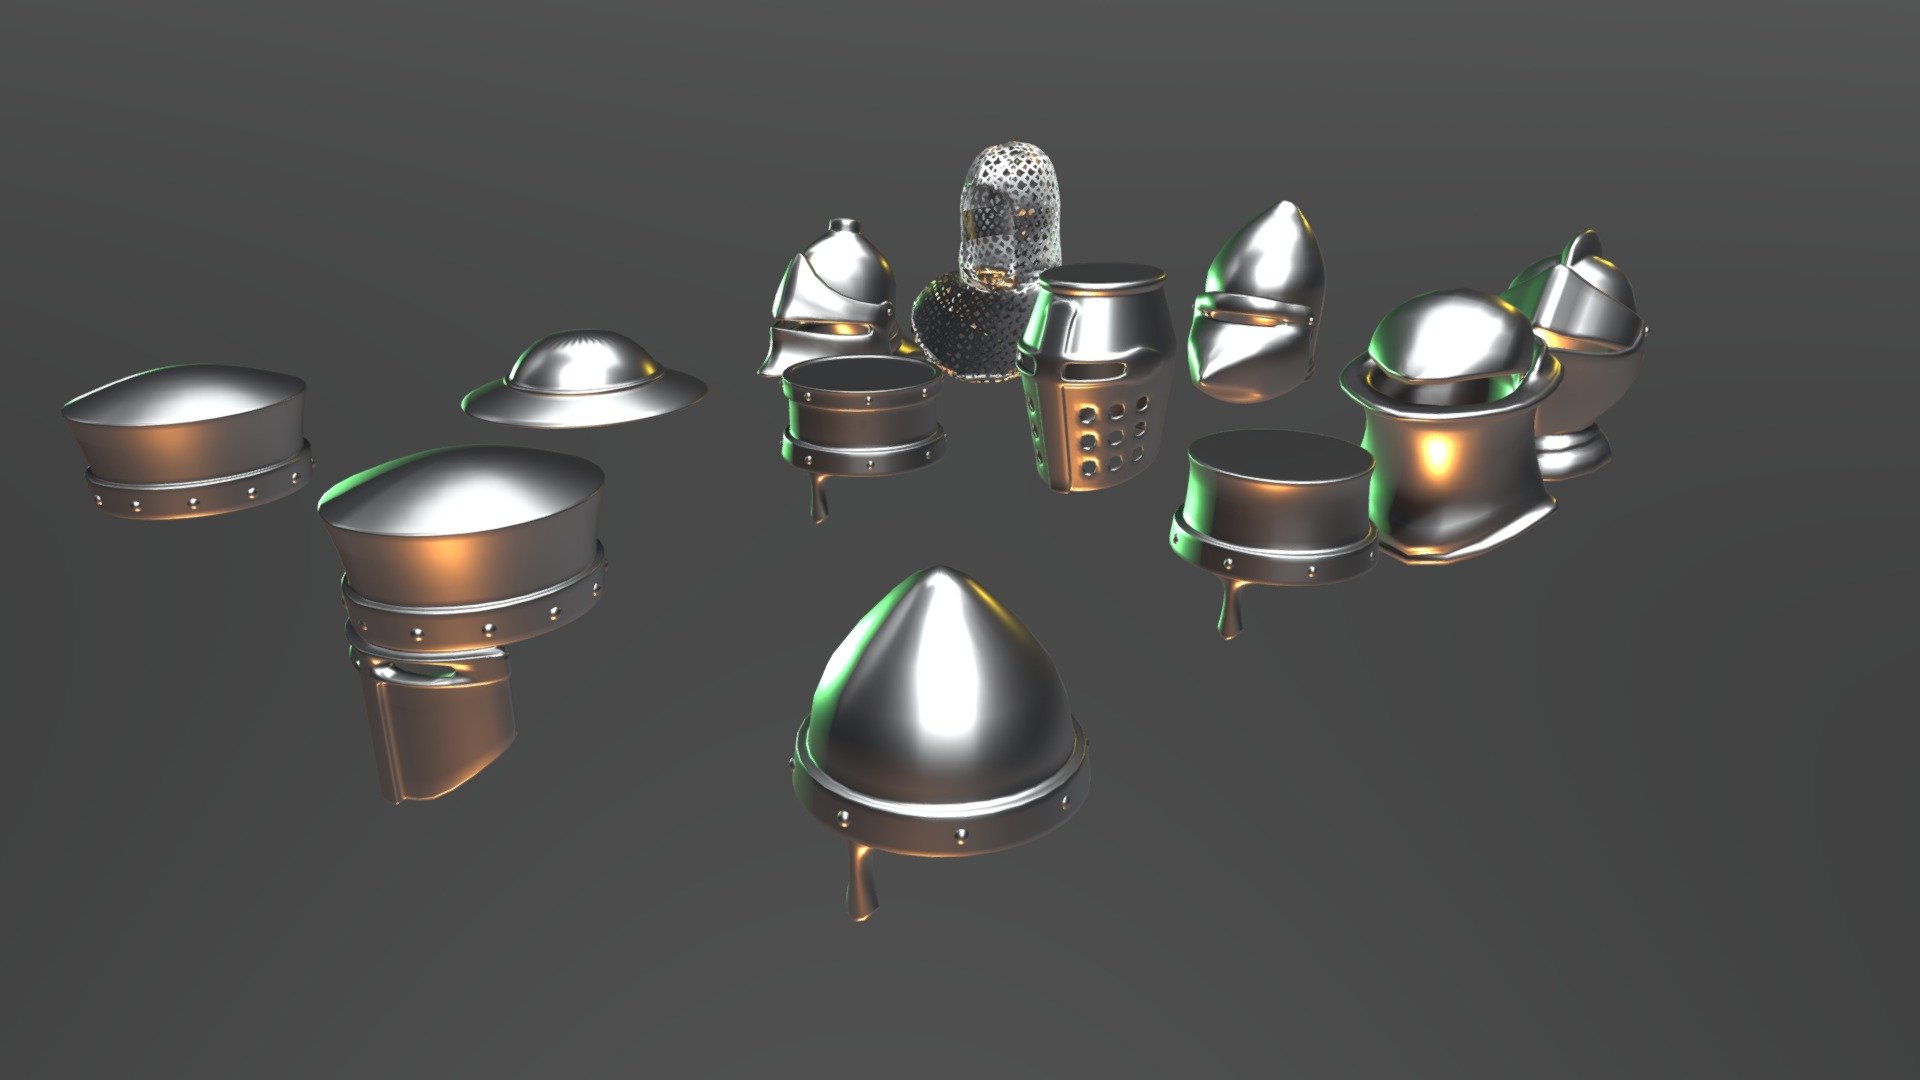 These are a set of medieval style helmets.  They are low-medium poly 3d model